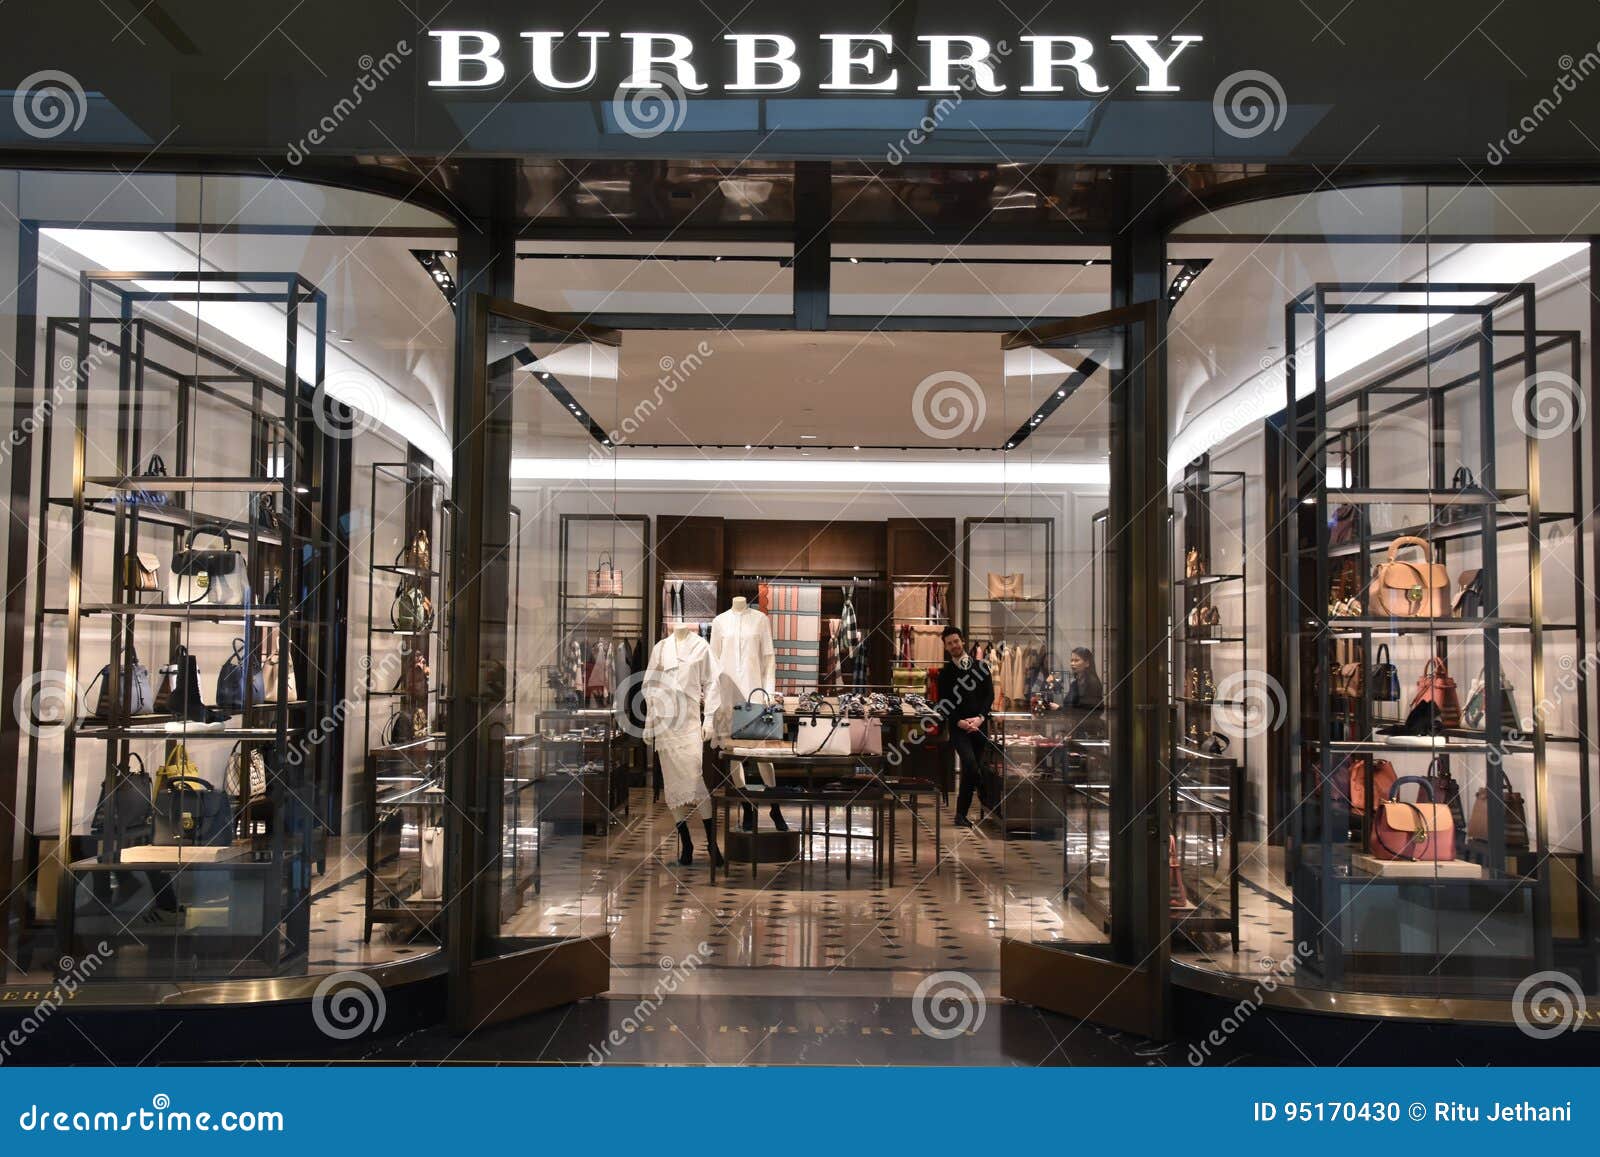 Actualizar 94+ imagen burberry king of prussia pa